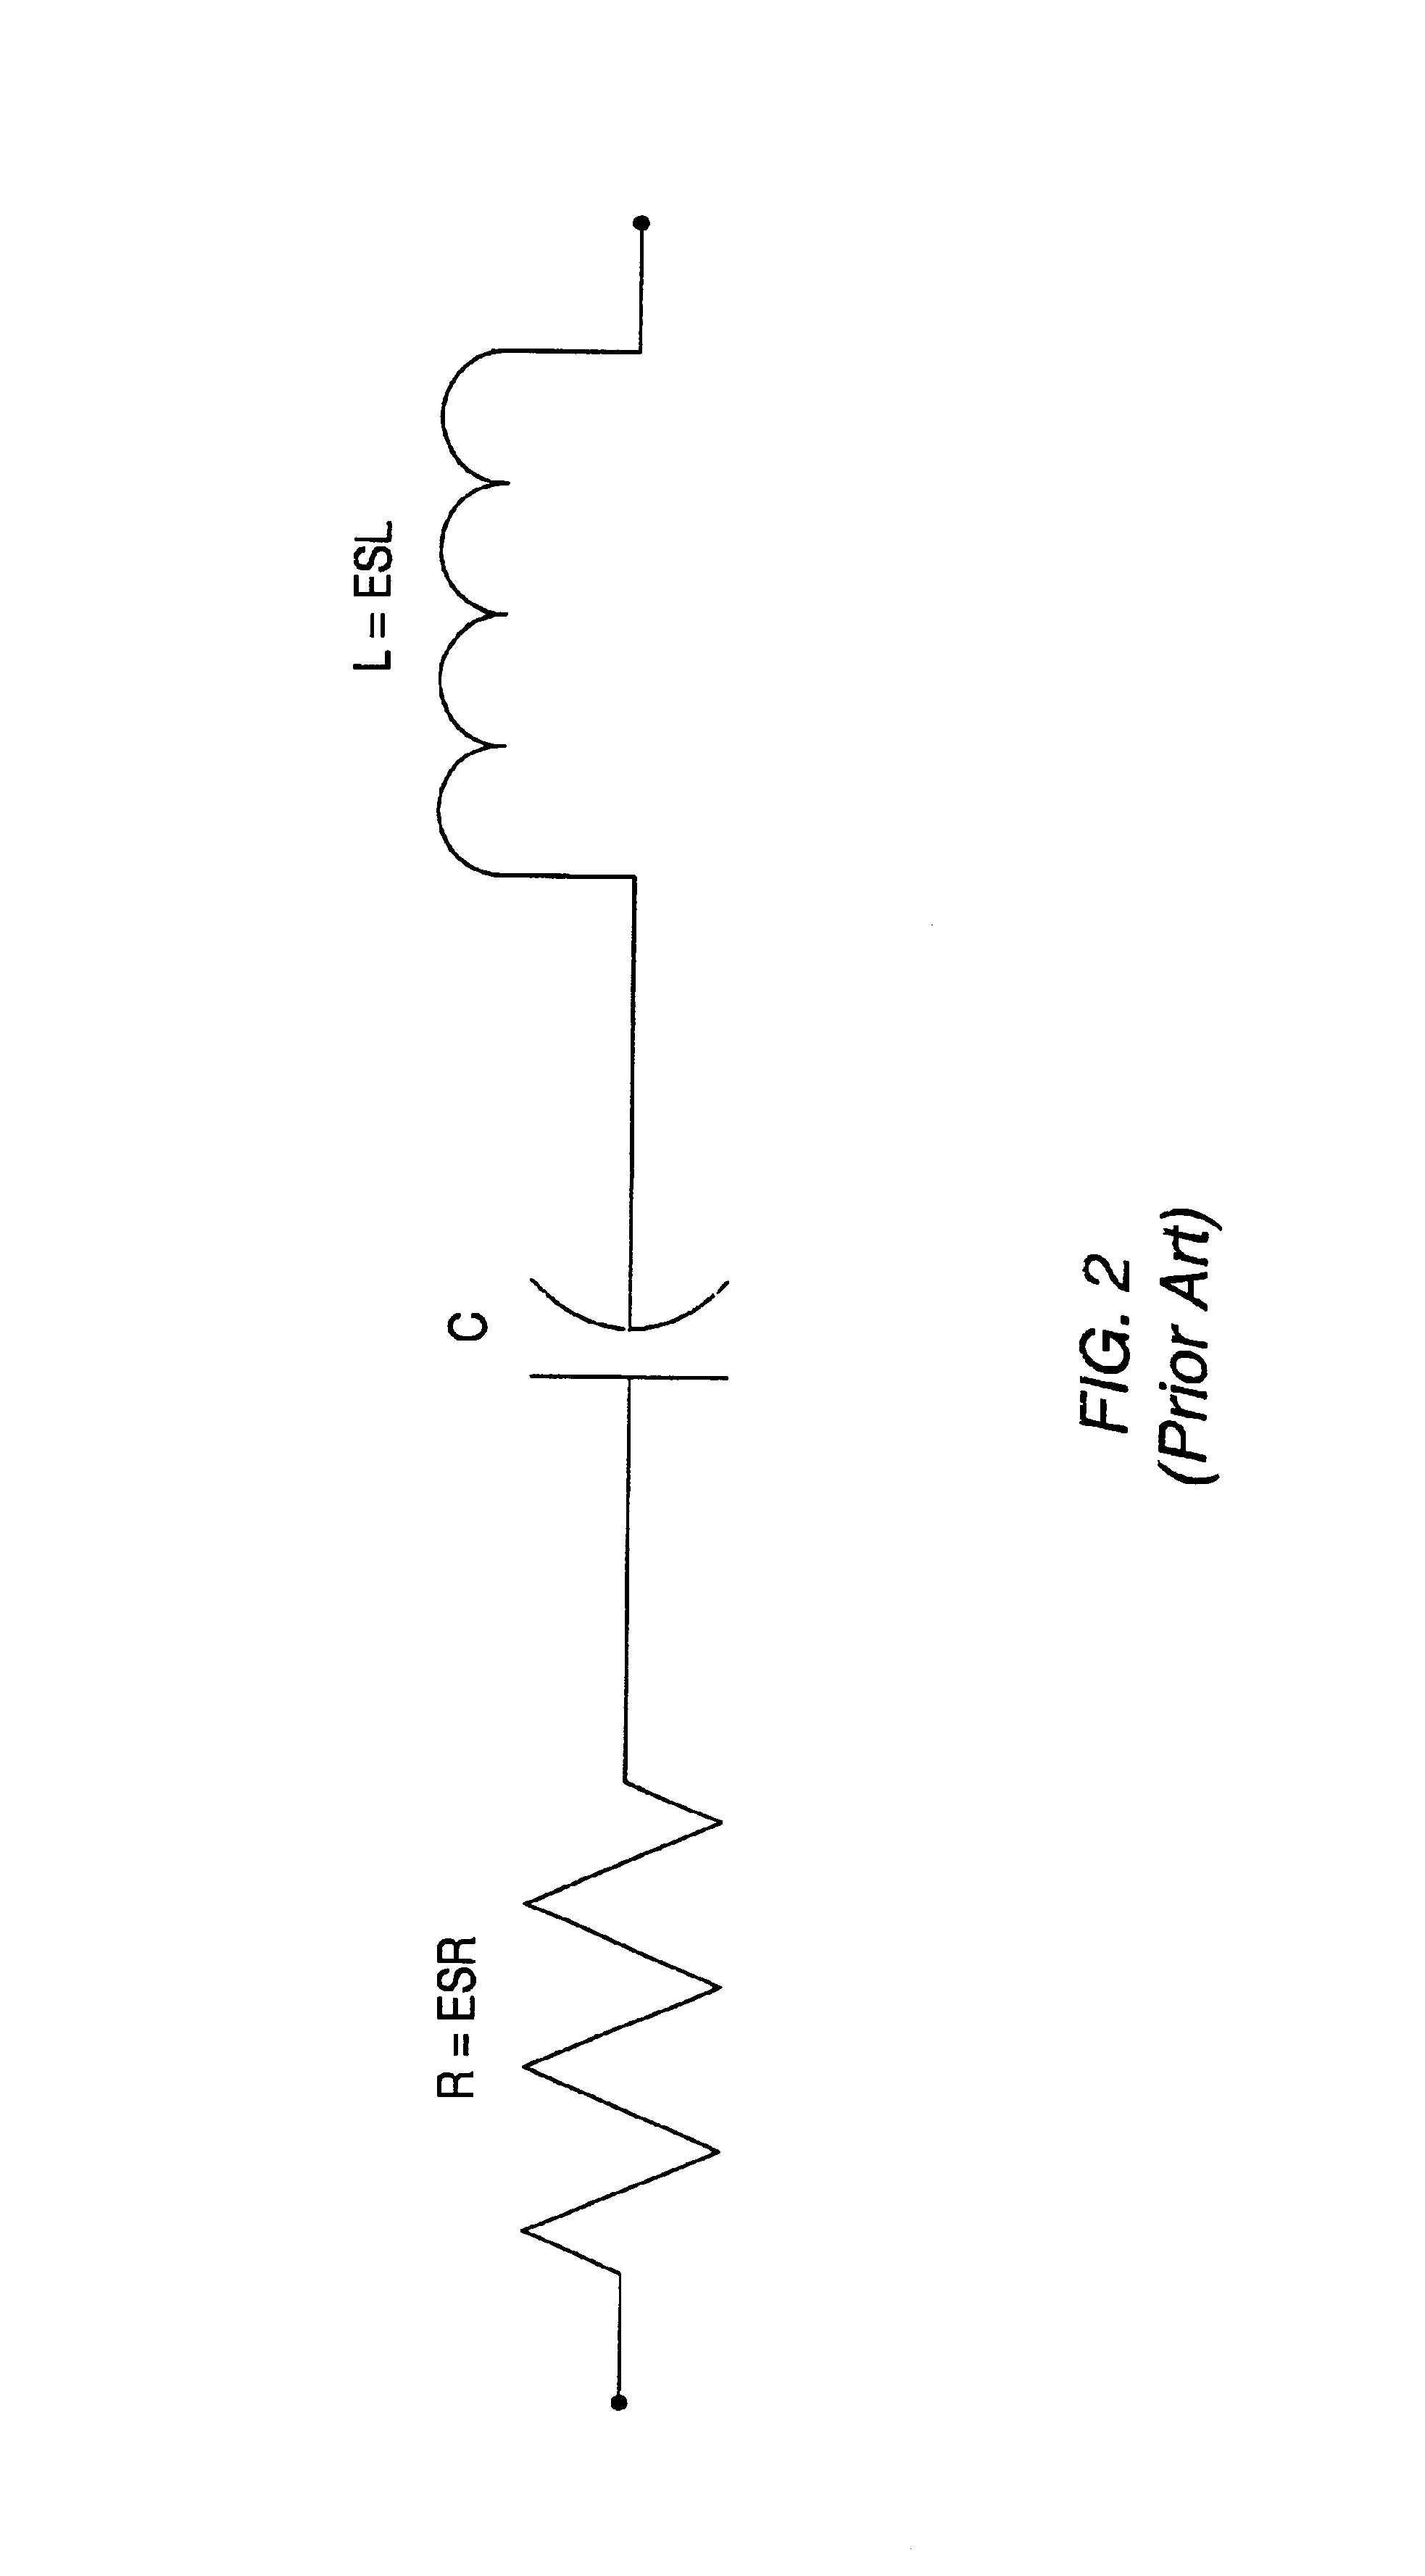 System and method for determining the required decoupling capacitors for a power distribution system using an improved capacitor model